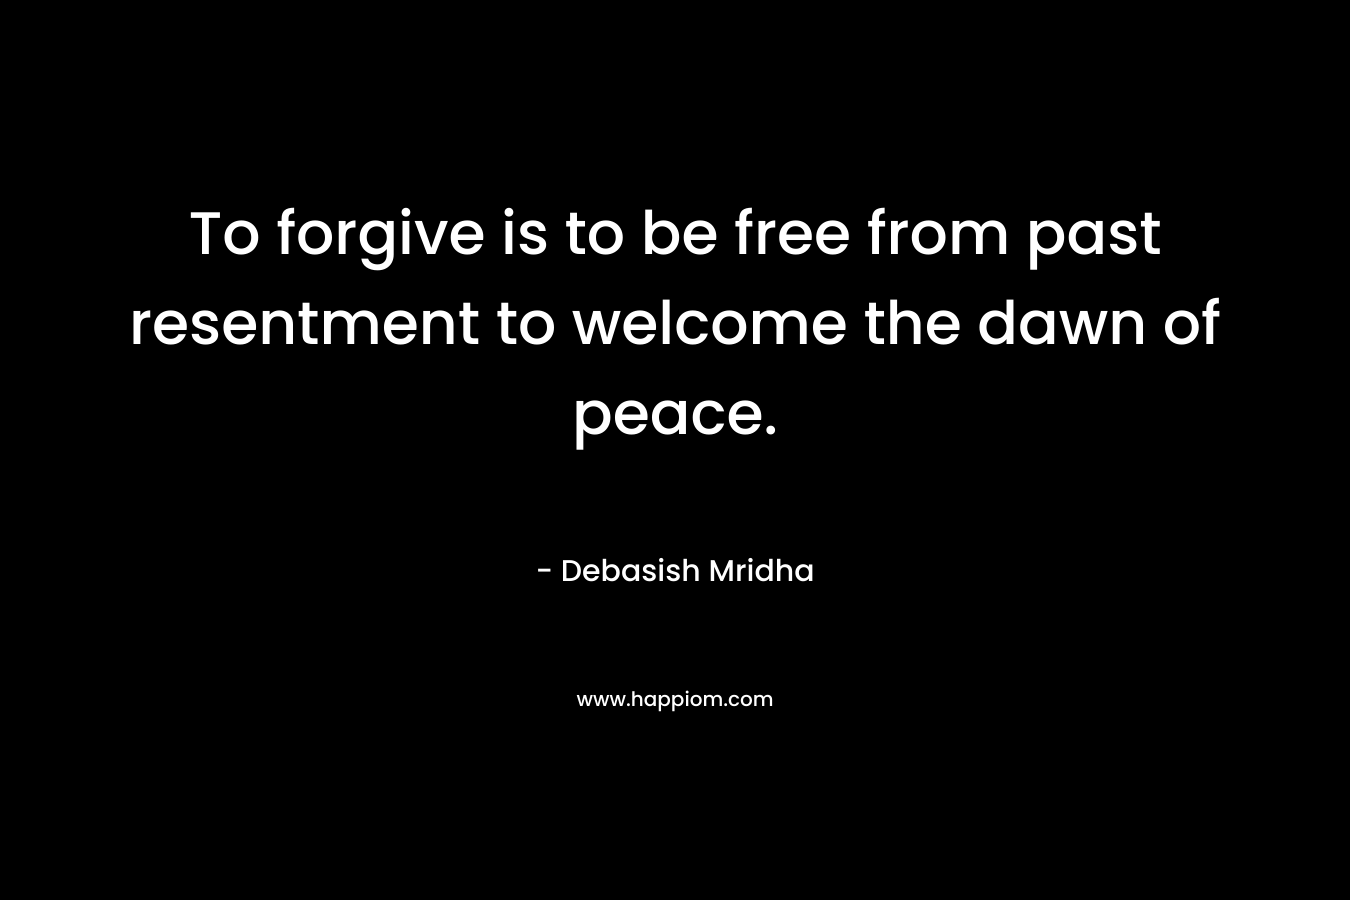 To forgive is to be free from past resentment to welcome the dawn of peace.